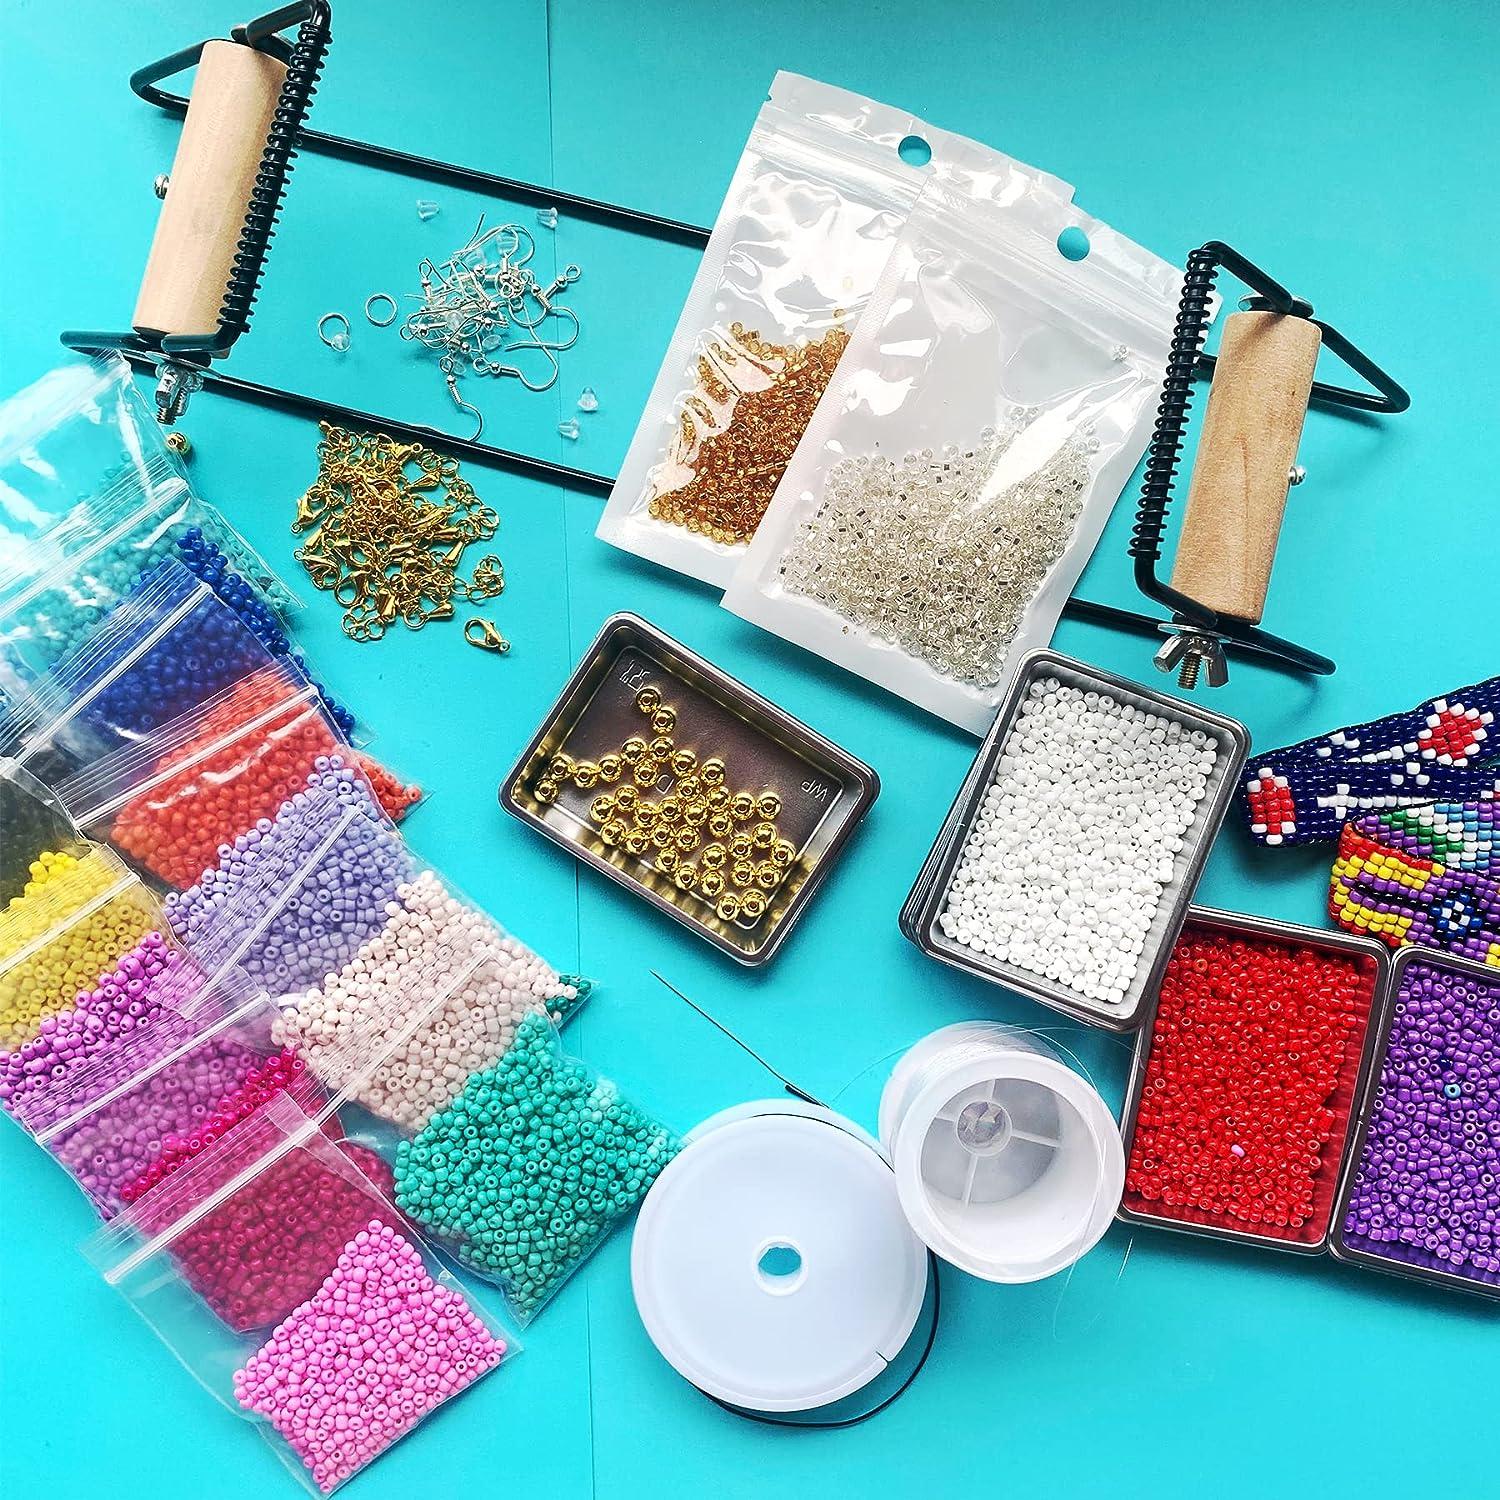 Frame Bead Loom Kit for Beaded Bracelets Earrings Belts Making, Include  17250 Seed Beads 3mm 18 Colors and 150 Meter Clear String, Beading Trays,  Needles, with Instruction, DIY Boho Jewelry